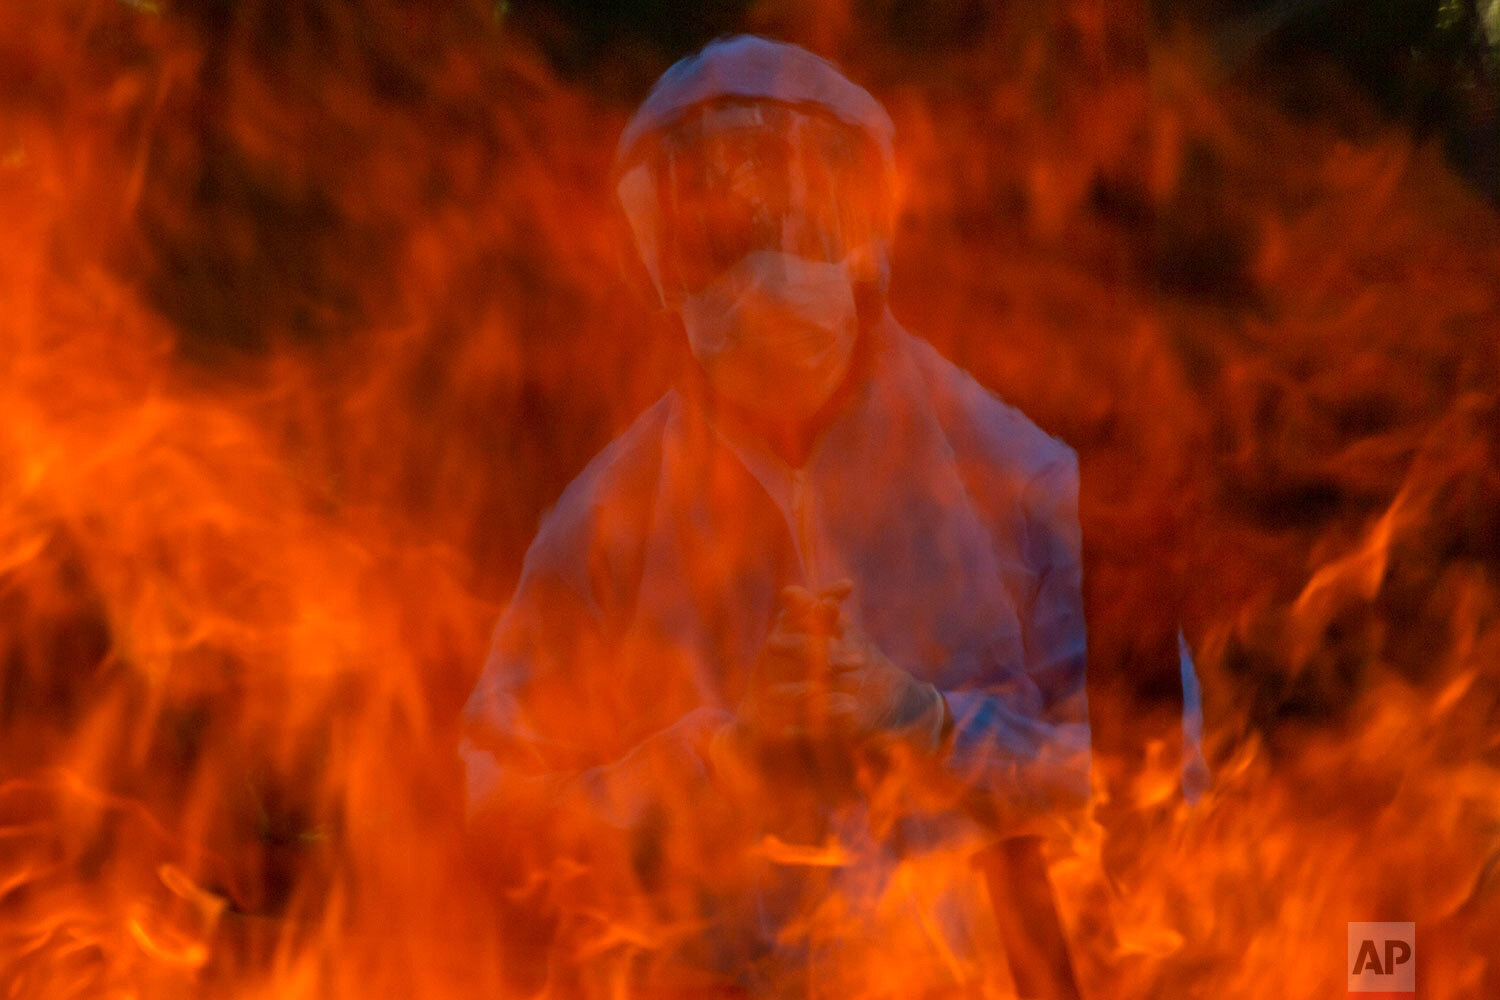  A man in a protective suit stands next to the burning pyre of a person who died of COVID-19, at a crematorium in Srinagar, Indian controlled Kashmir, Friday, May 28, 2021. (AP Photo/ Dar Yasin) 